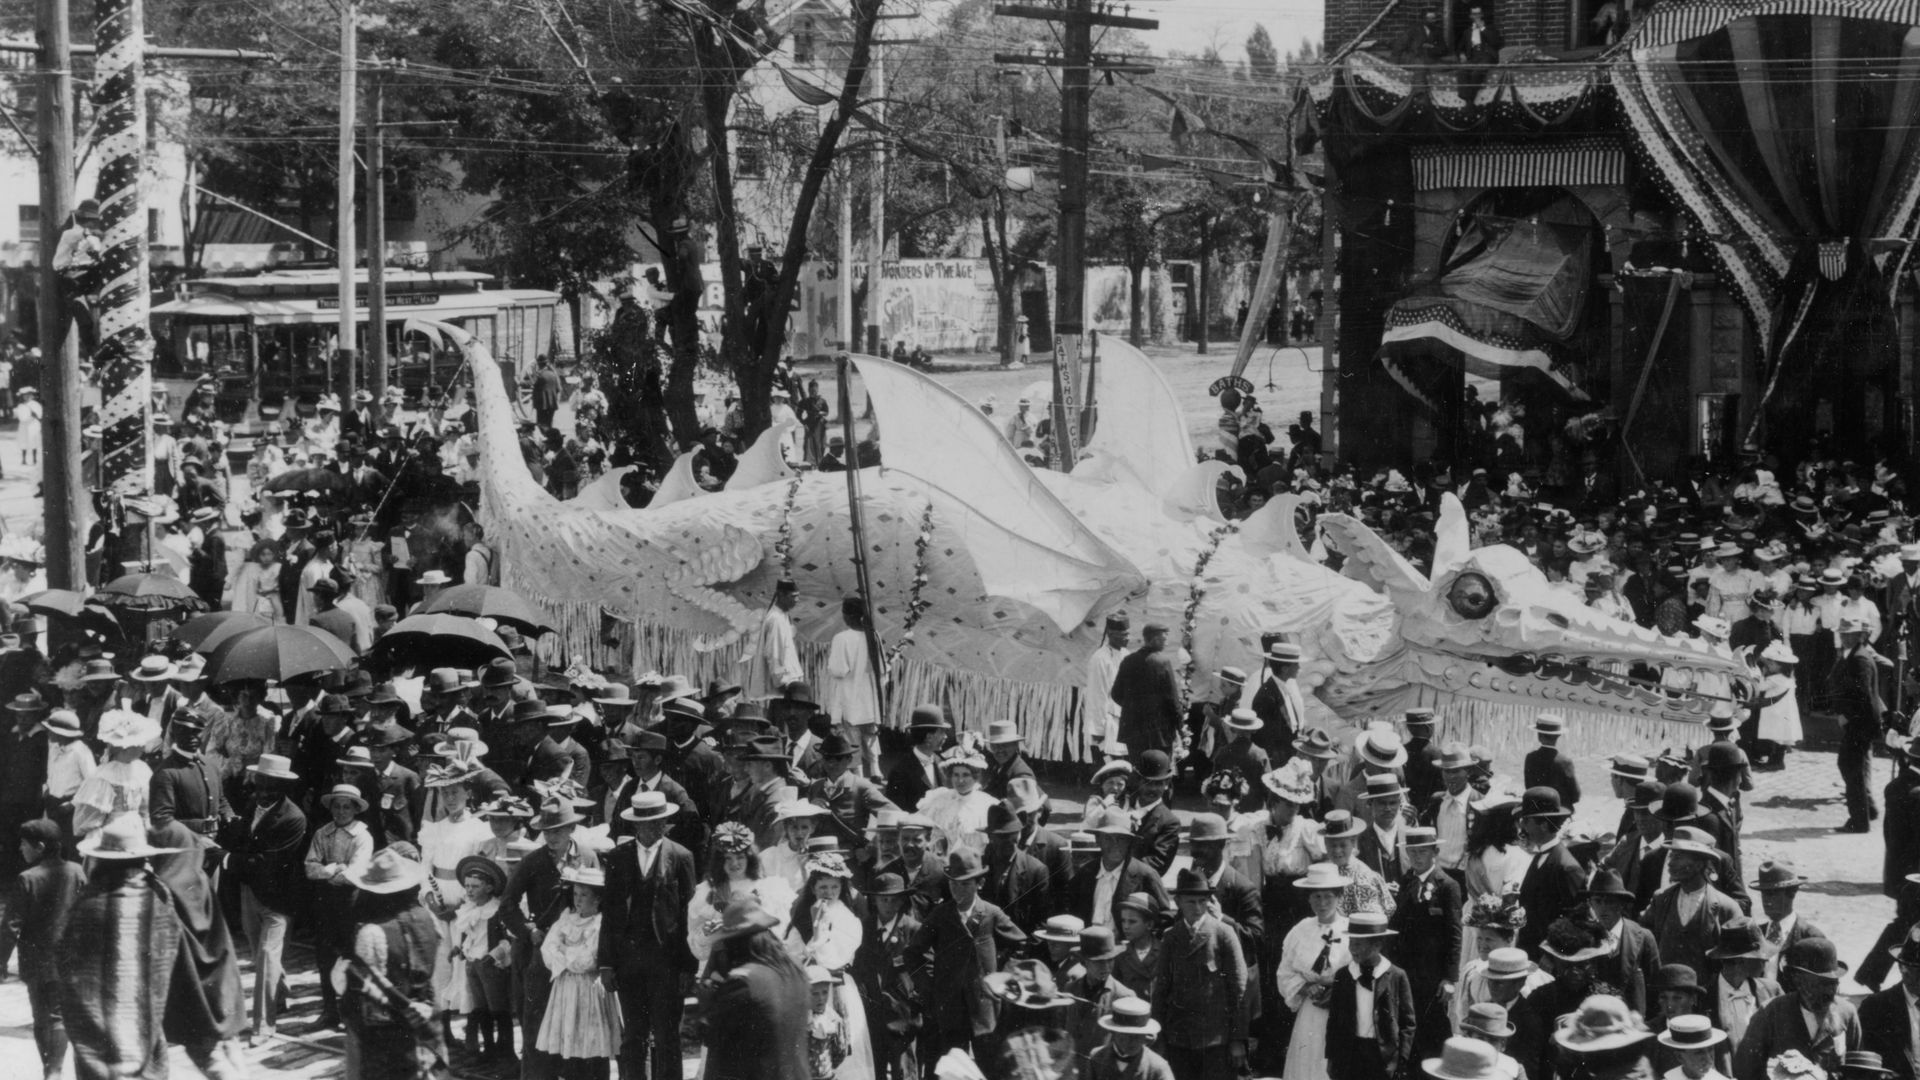 A float shaped like a dragon in a parade in 1897.